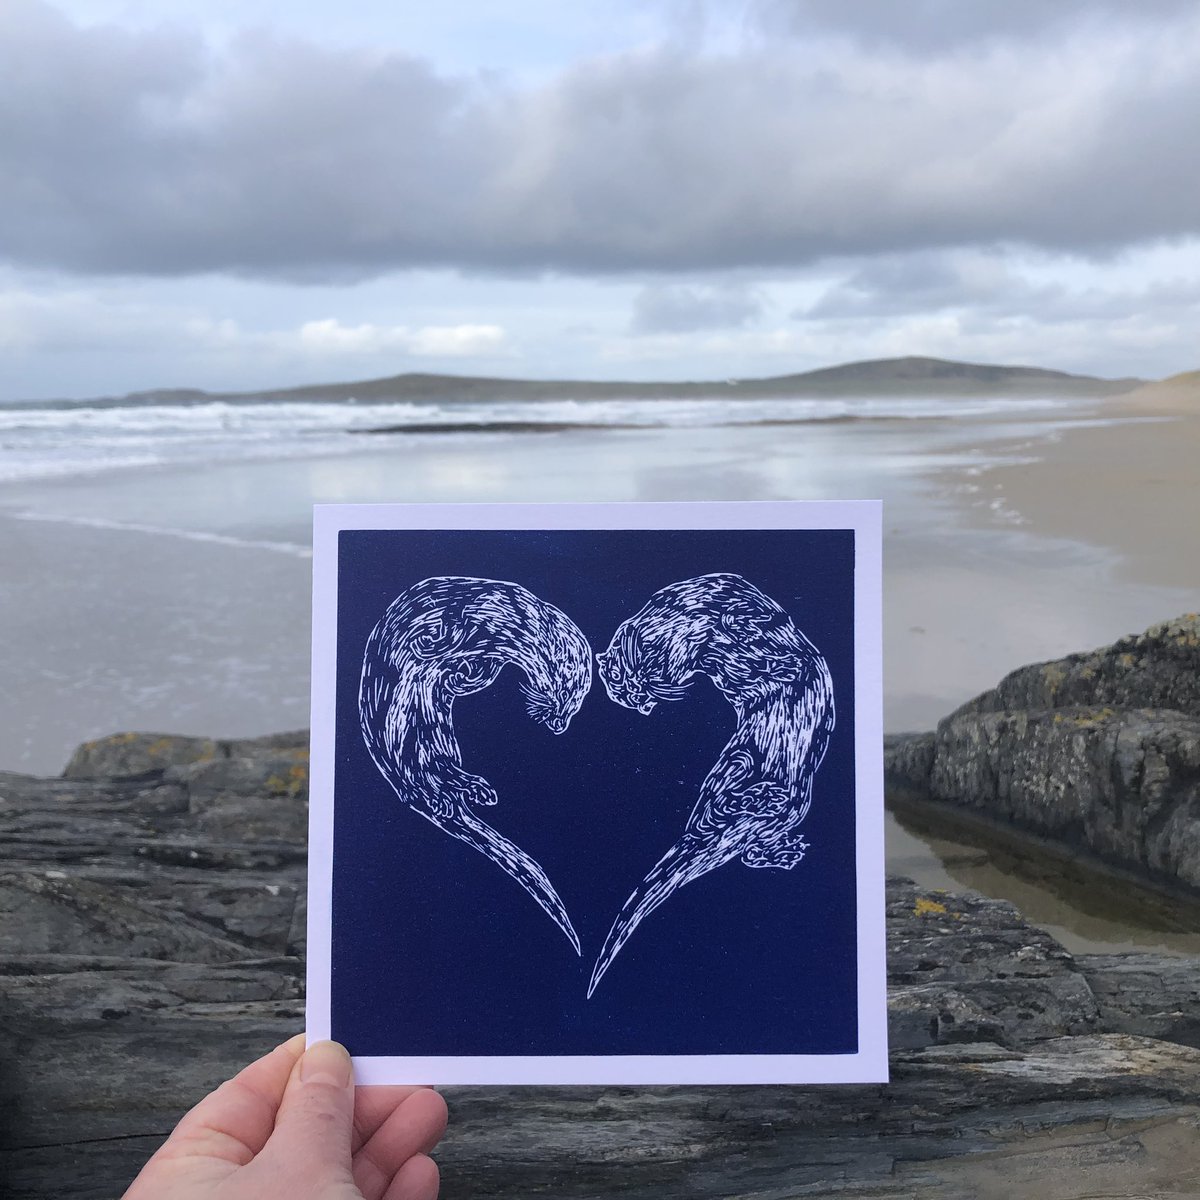 🦦🦦 Last orders for our handprinted linocut Valentines Day Cards is Wed 8th as we are headed to the mainland to find some snow and then watch @HamzaYassin3’s moves at the Hydro⛷️🕺💙👇

islayprints.co.uk 

#ValentinesDay2023 #valentinescards #otters #europeanotter #islay